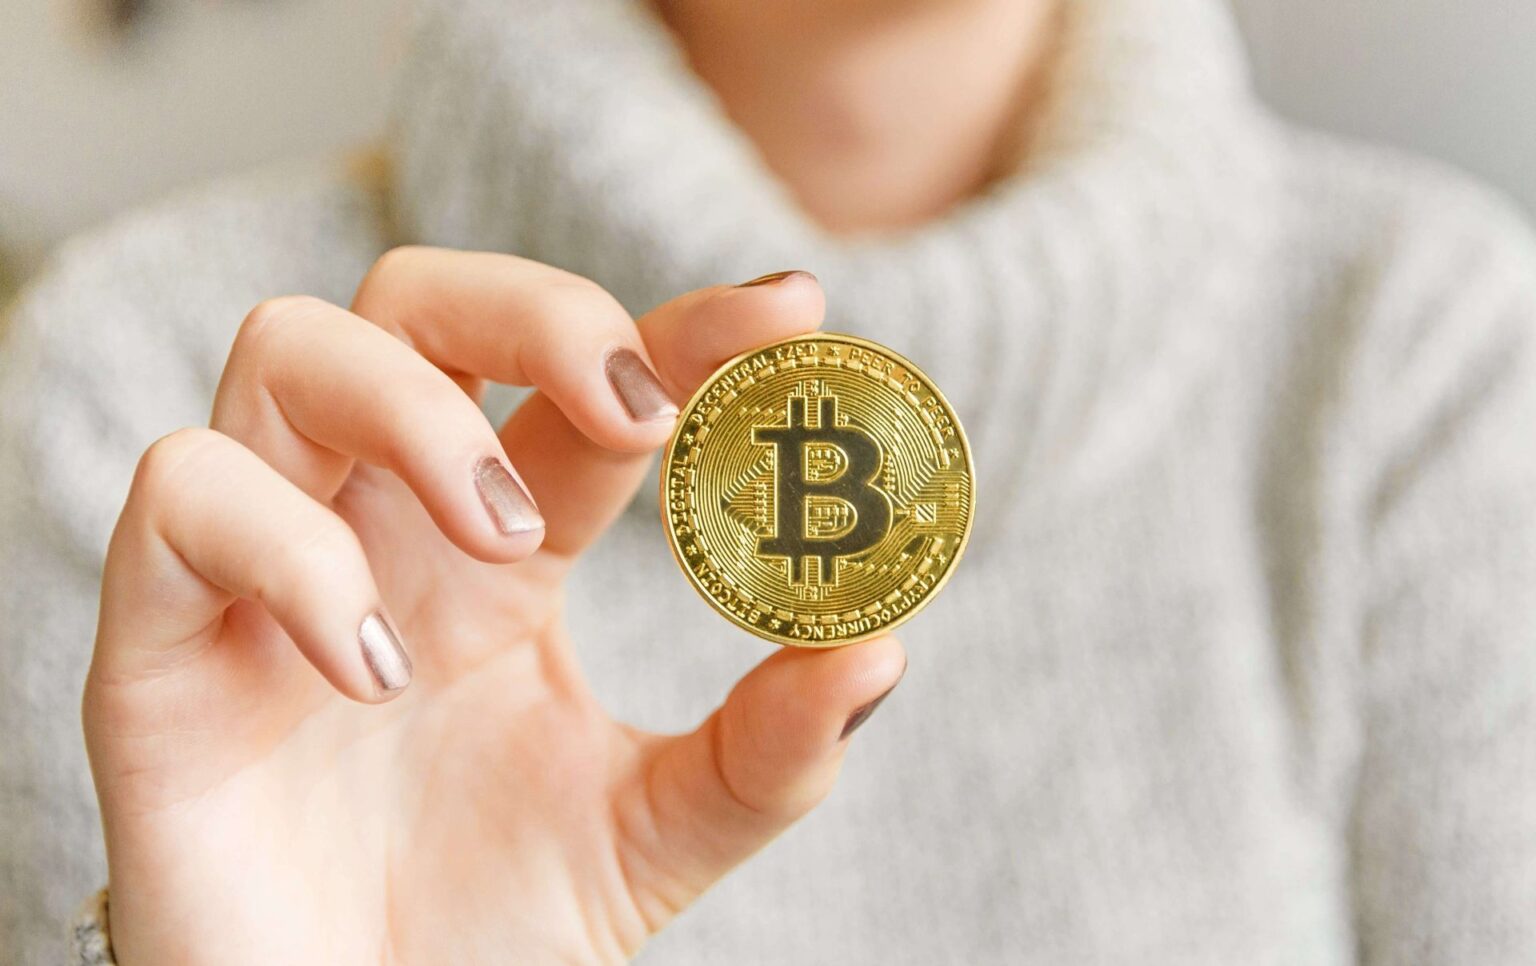 Bitcoin is growing bigger every day. Here are some of the hottest shopping trends associated with the cryptocurrency.